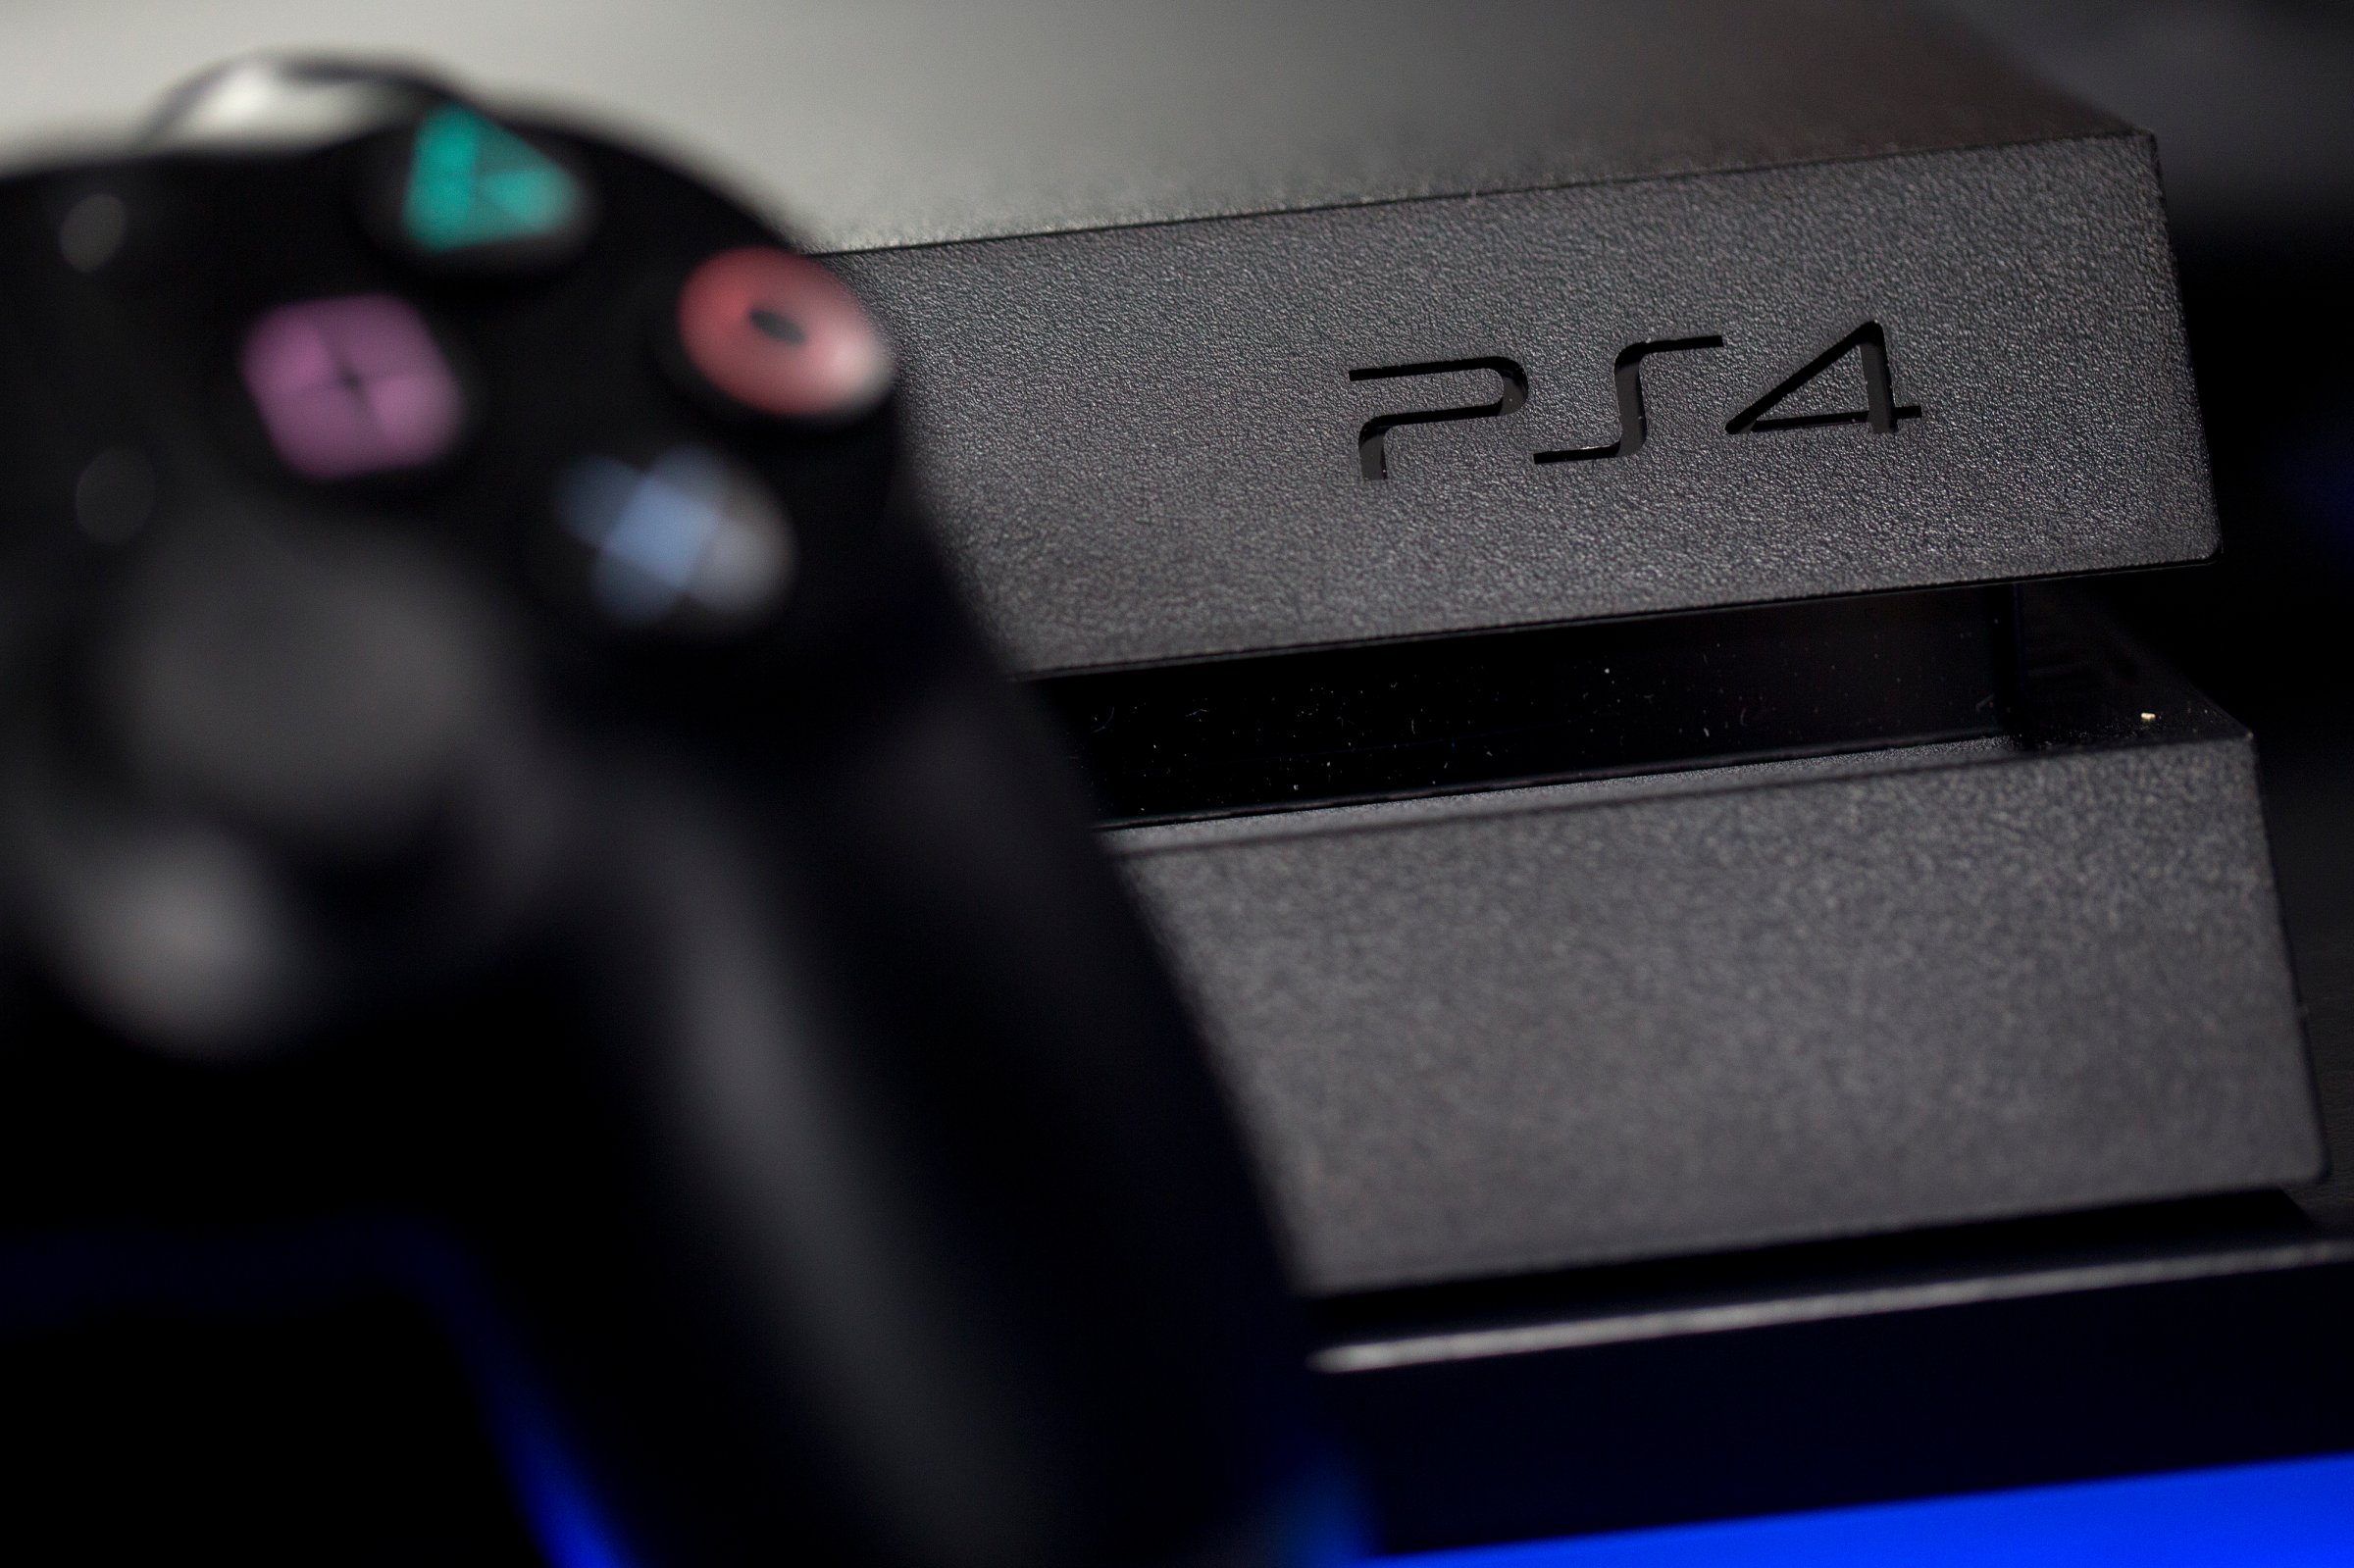 A logo sits on the front of a Sony PlayStation 4 (PS4) games console, manufactured by Sony Corp., in this arranged photograph taken in London on Nov. 15, 2013